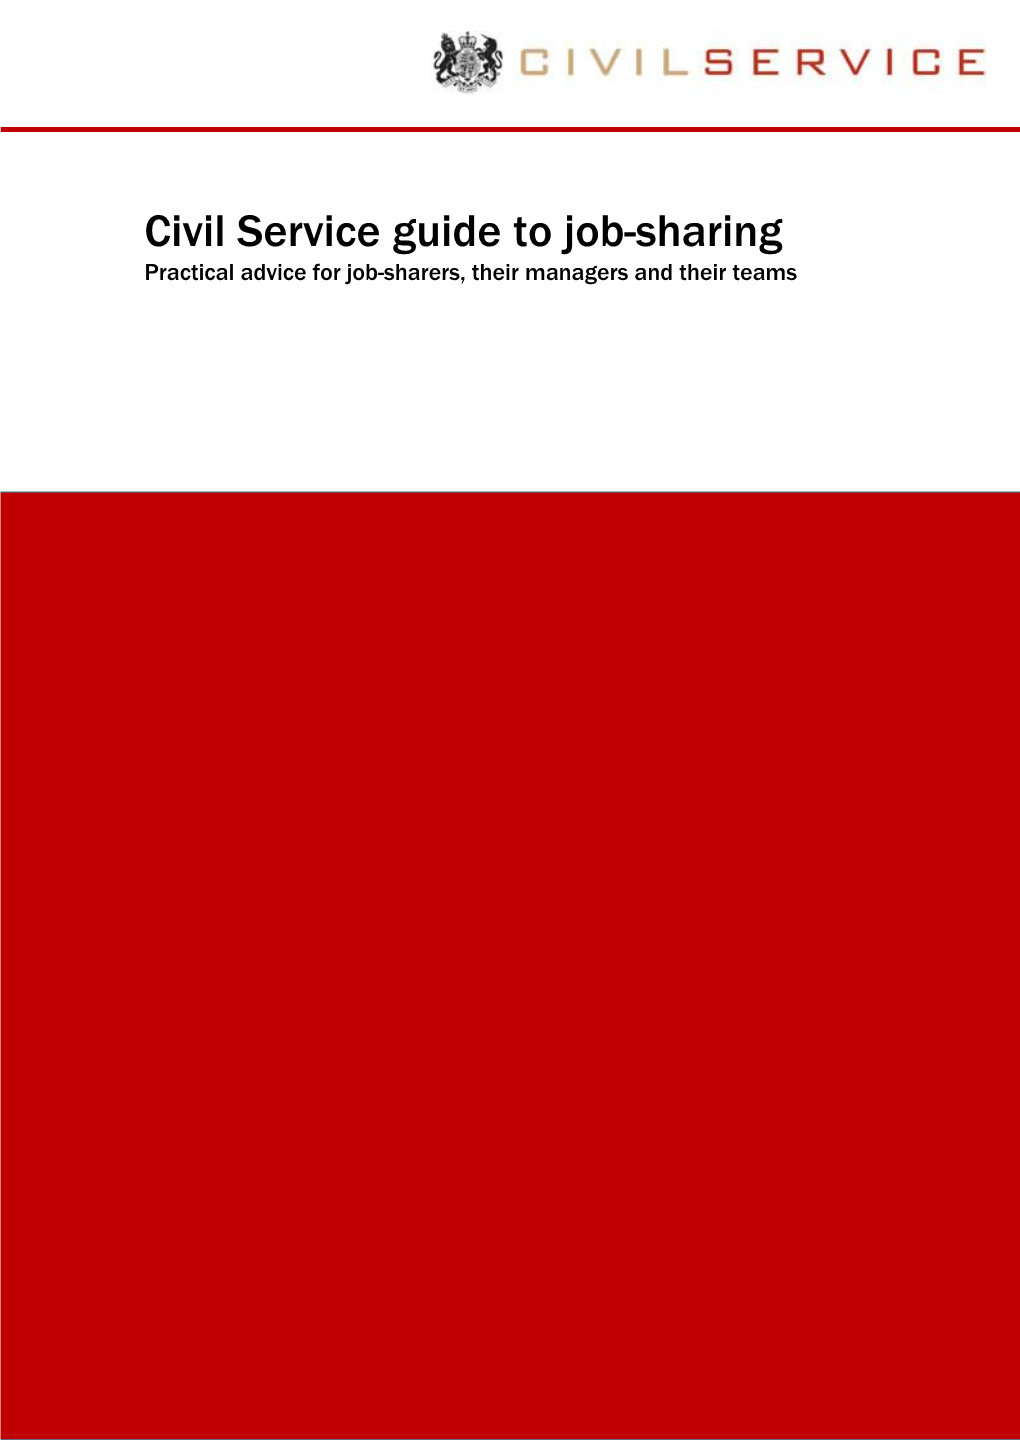 Civil Service Guide to Job-Sharing Practical Advice for Job-Sharers, Their Managers and Their Teams